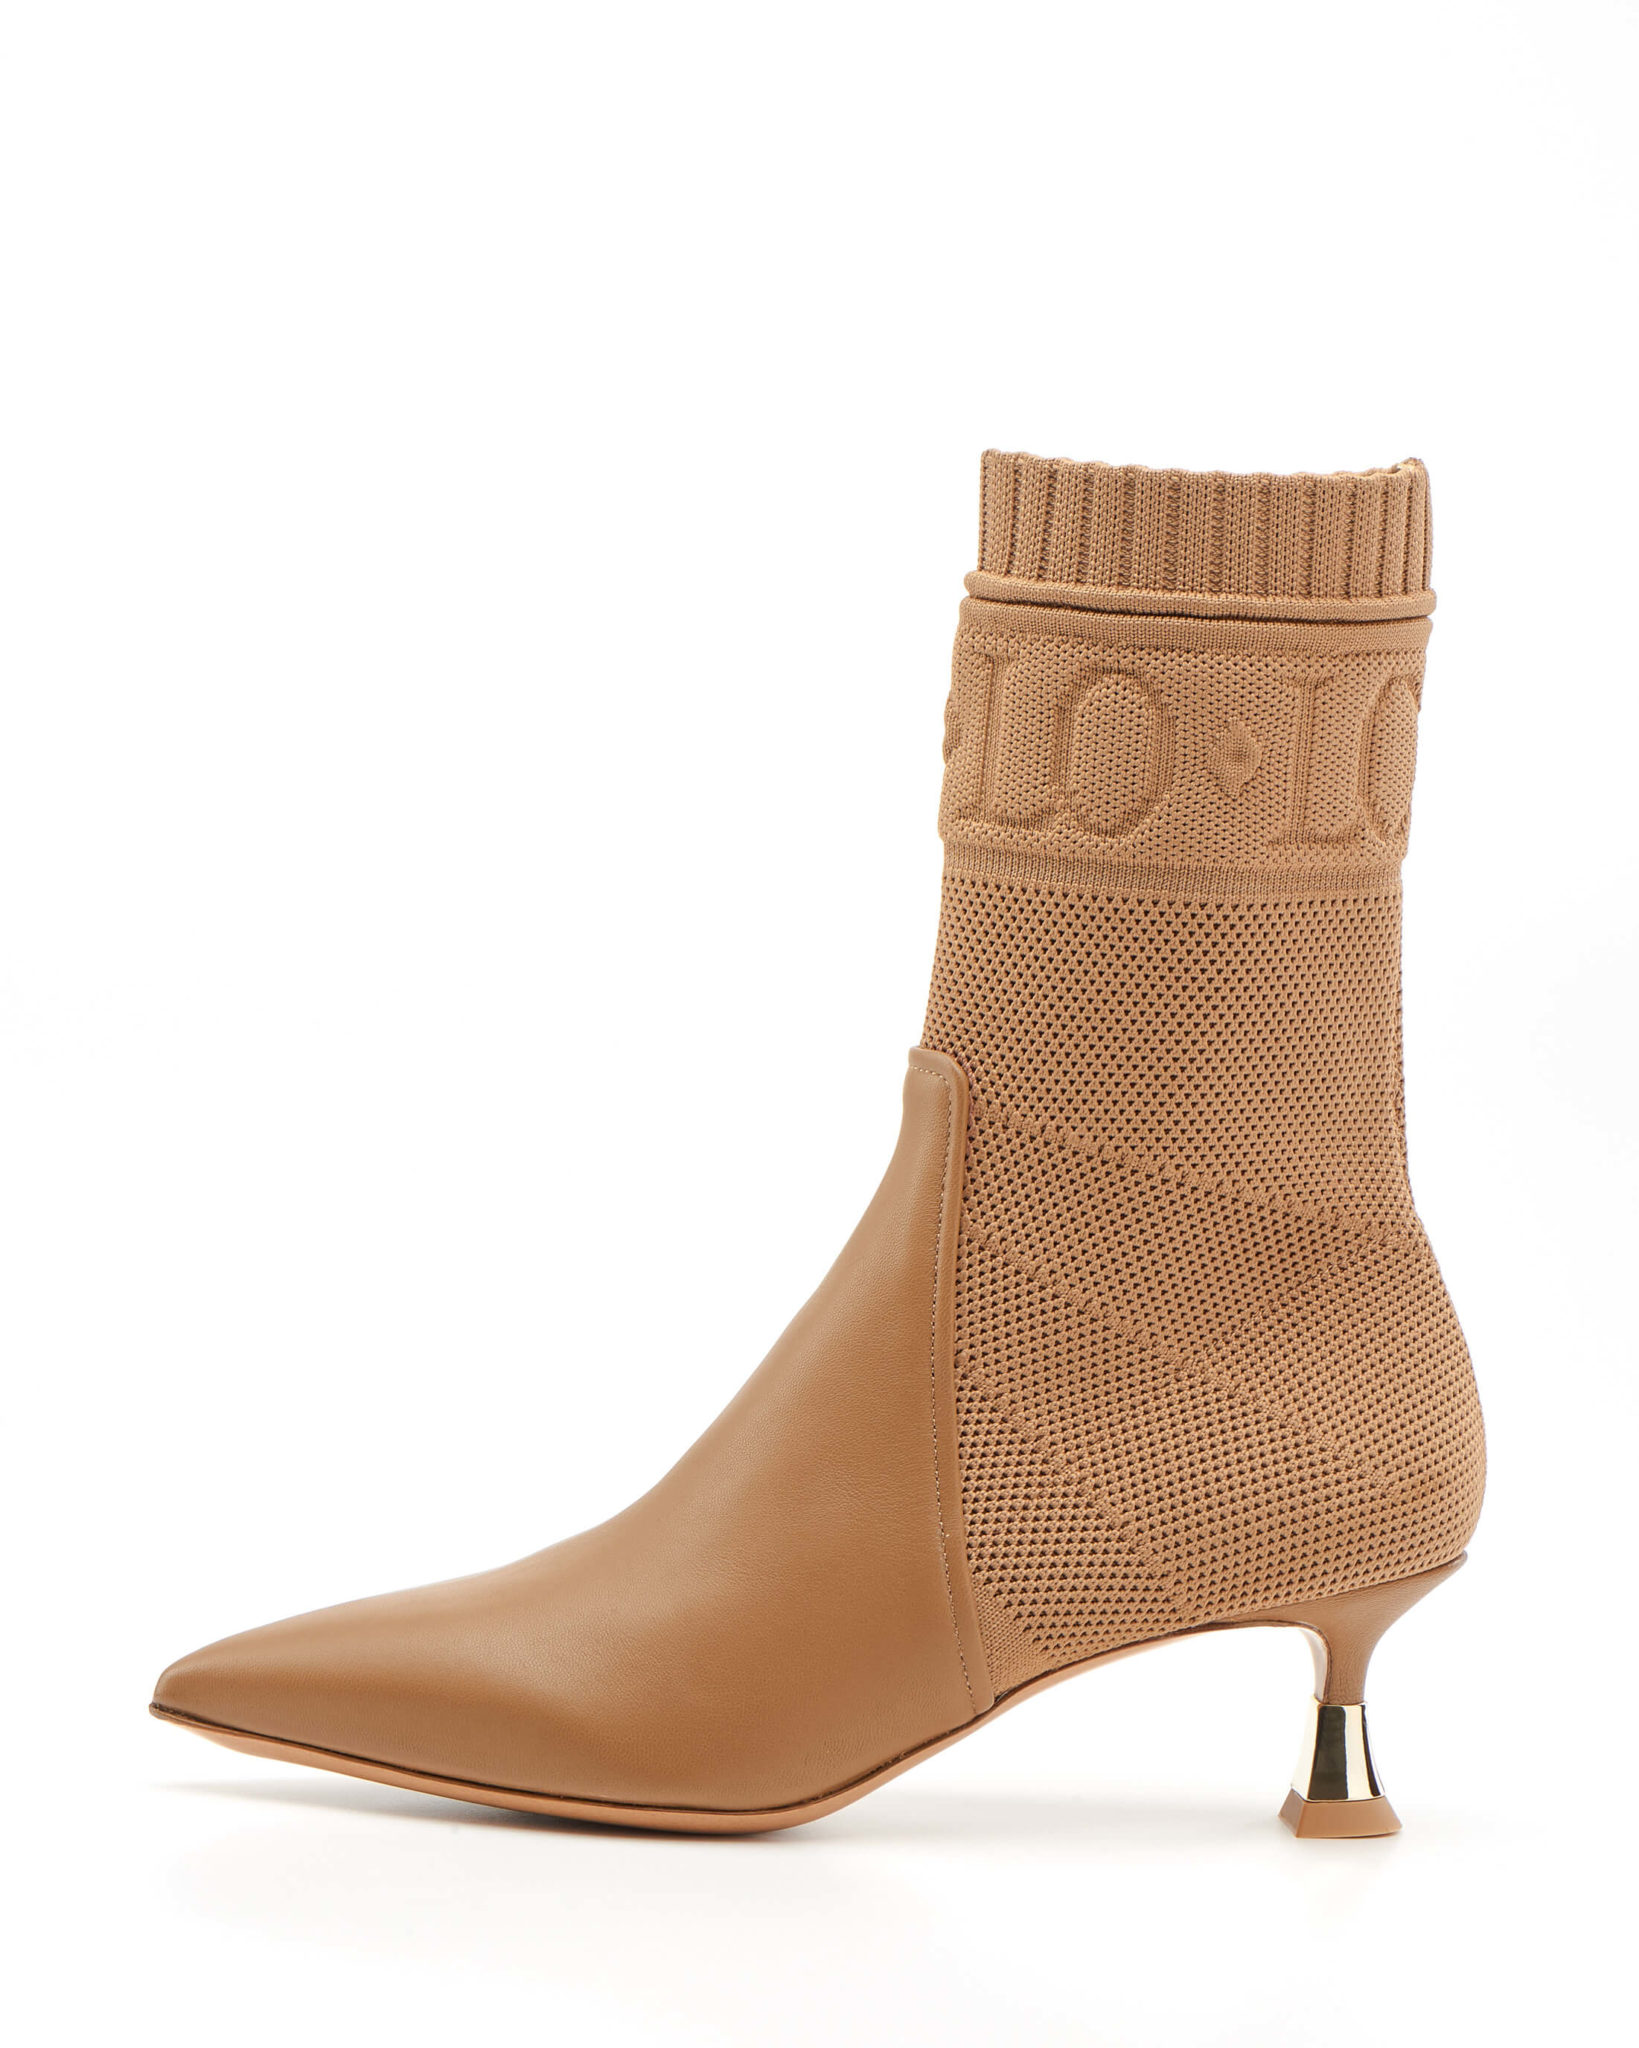 Sock-style ankle boot | Beige leather